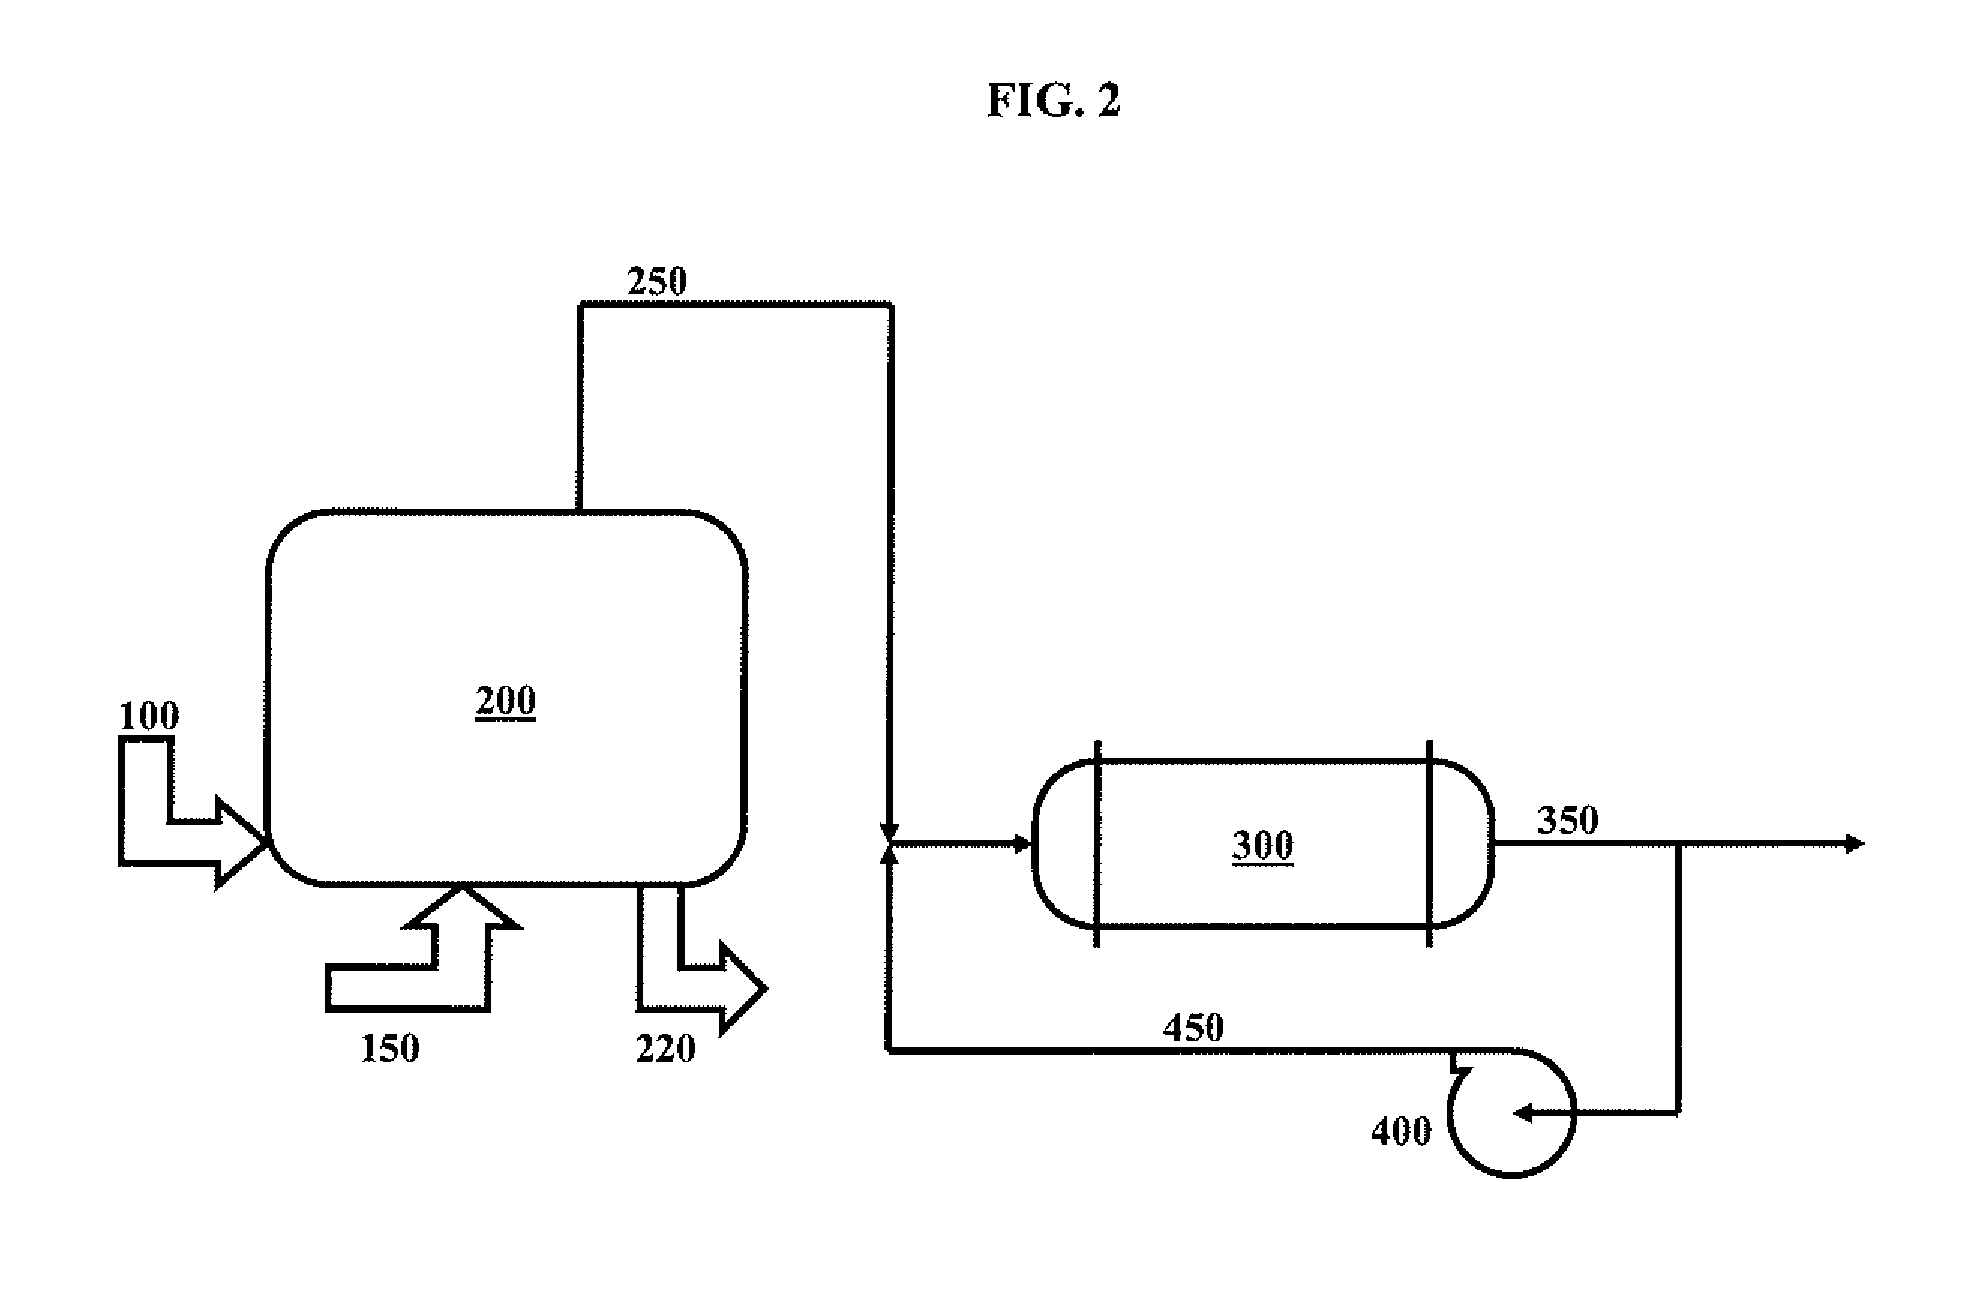 Method of Operation of Process to Produce Syngas from Carbonaceous Material